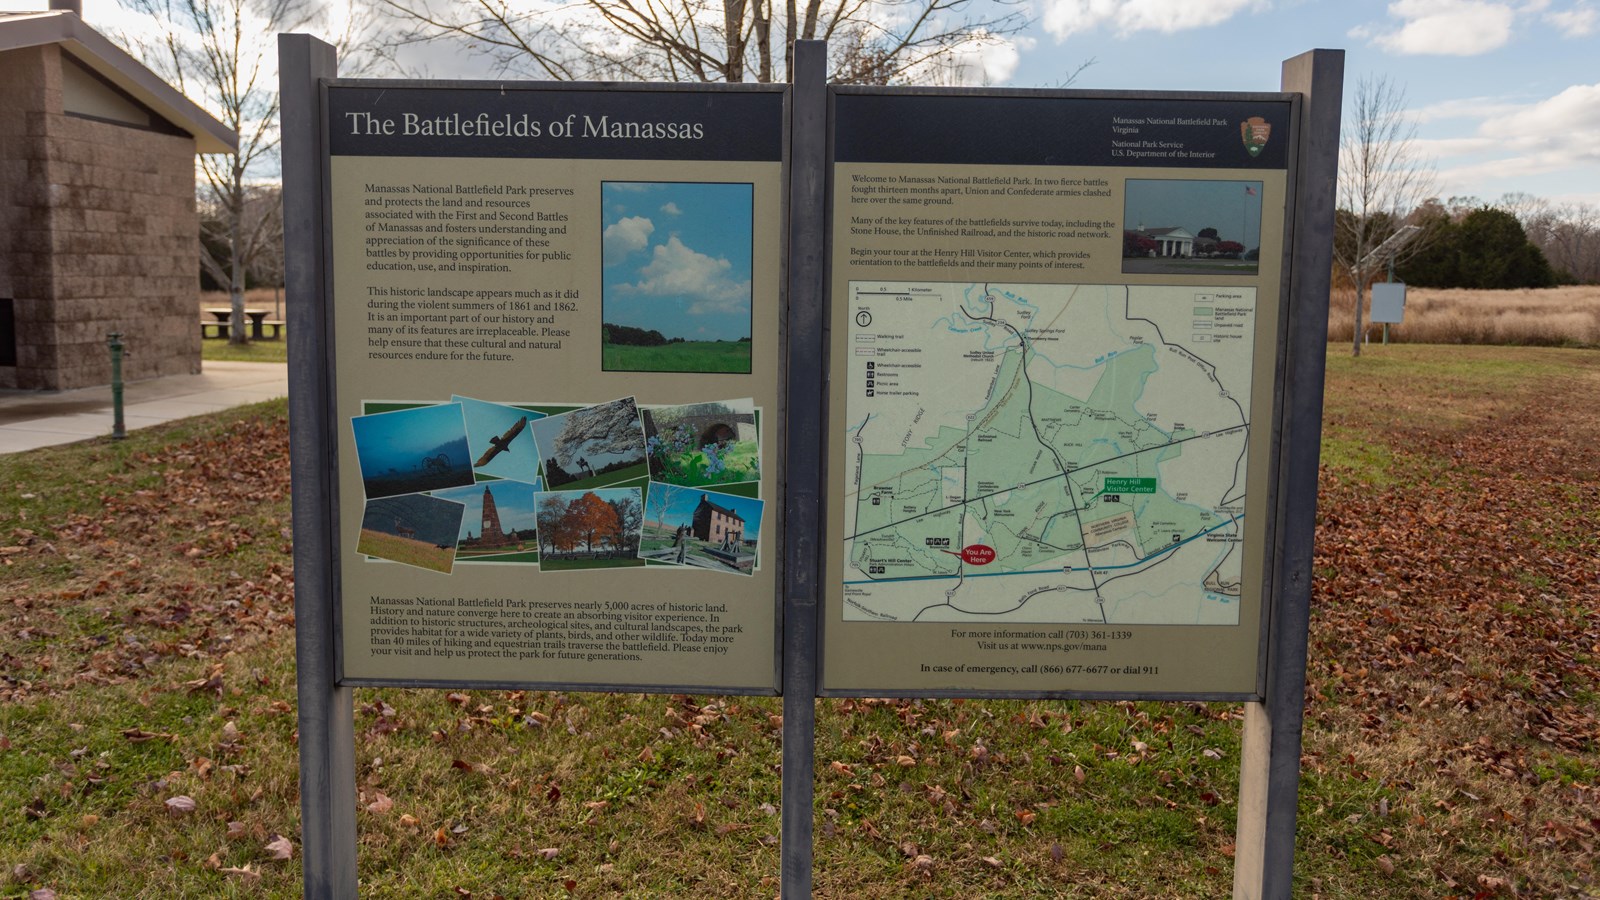 Pictures of different locations around Manassas are depicted in a collage between text. 